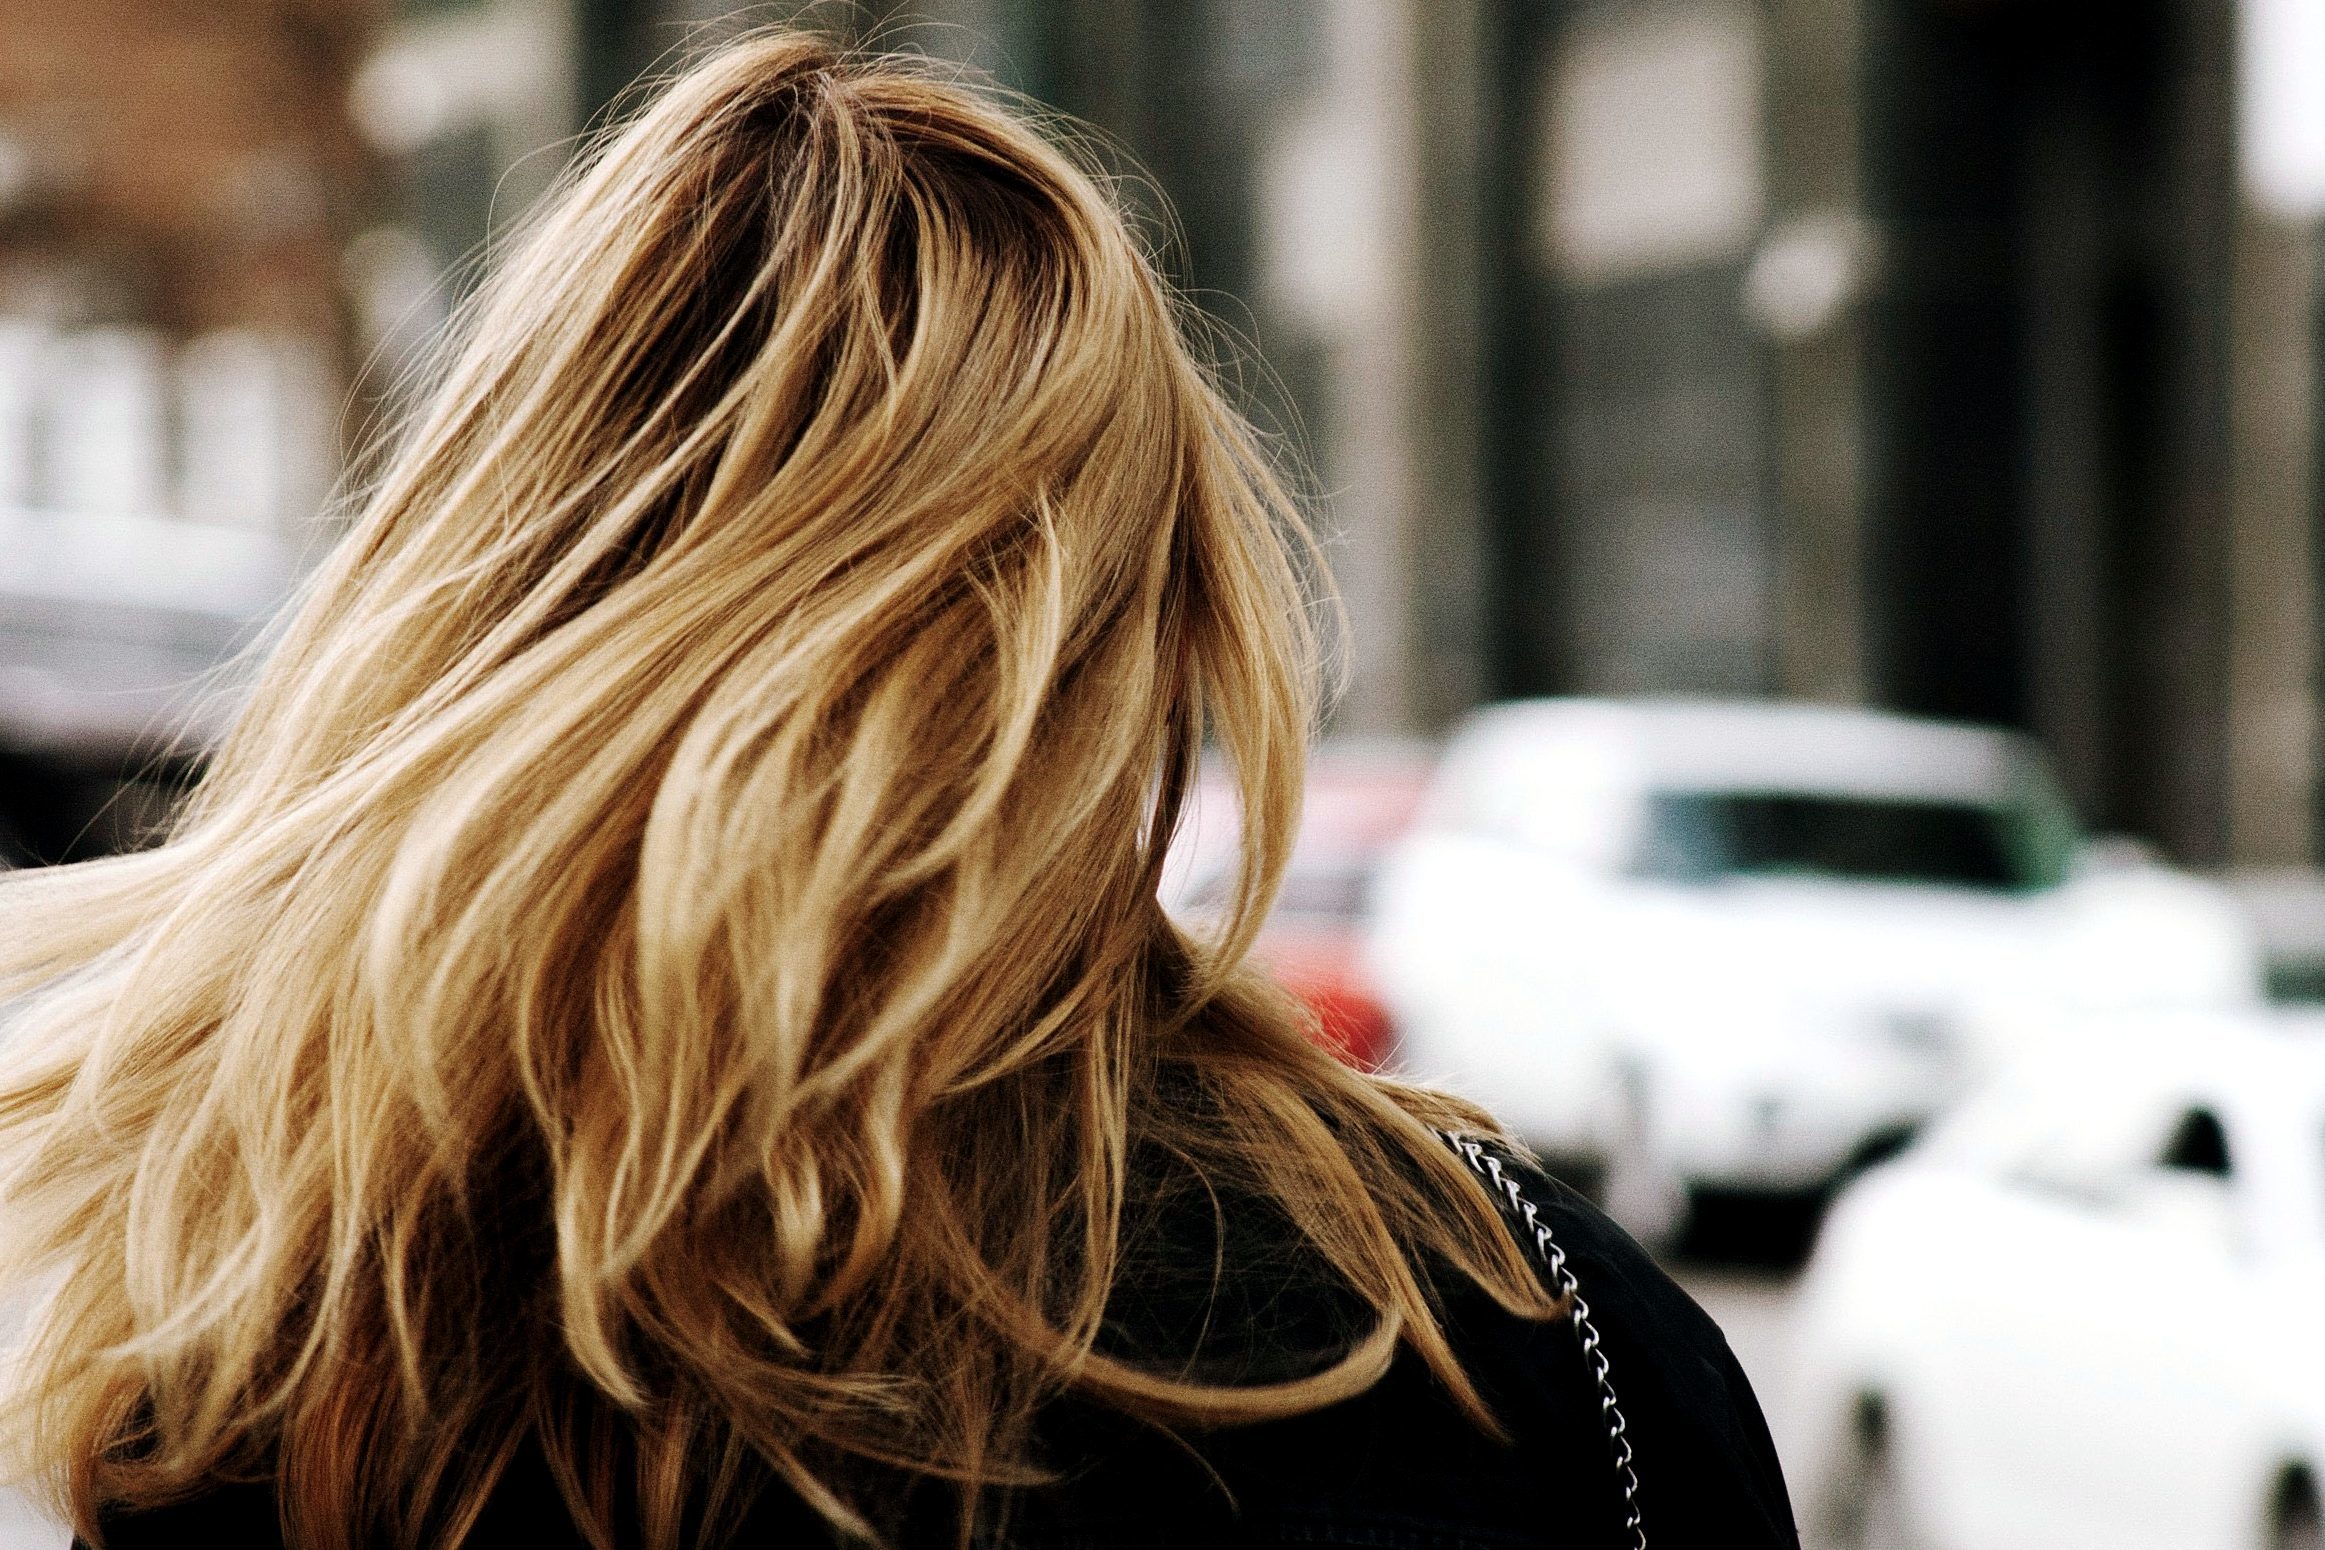 Back of woman's head with blonde hair - wide 9